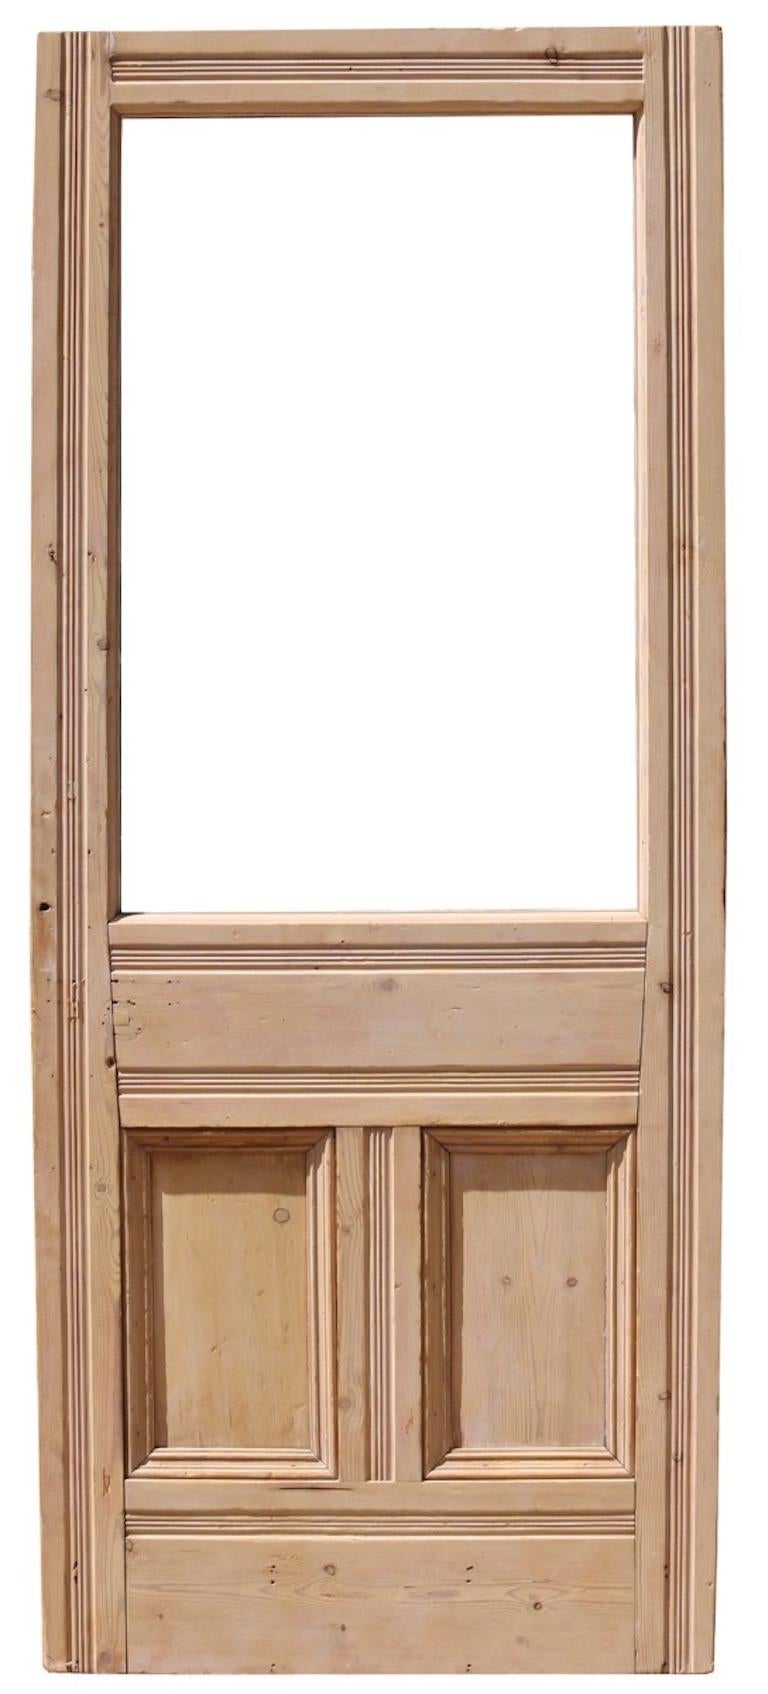 A reclaimed Victorian style front door for glazing.